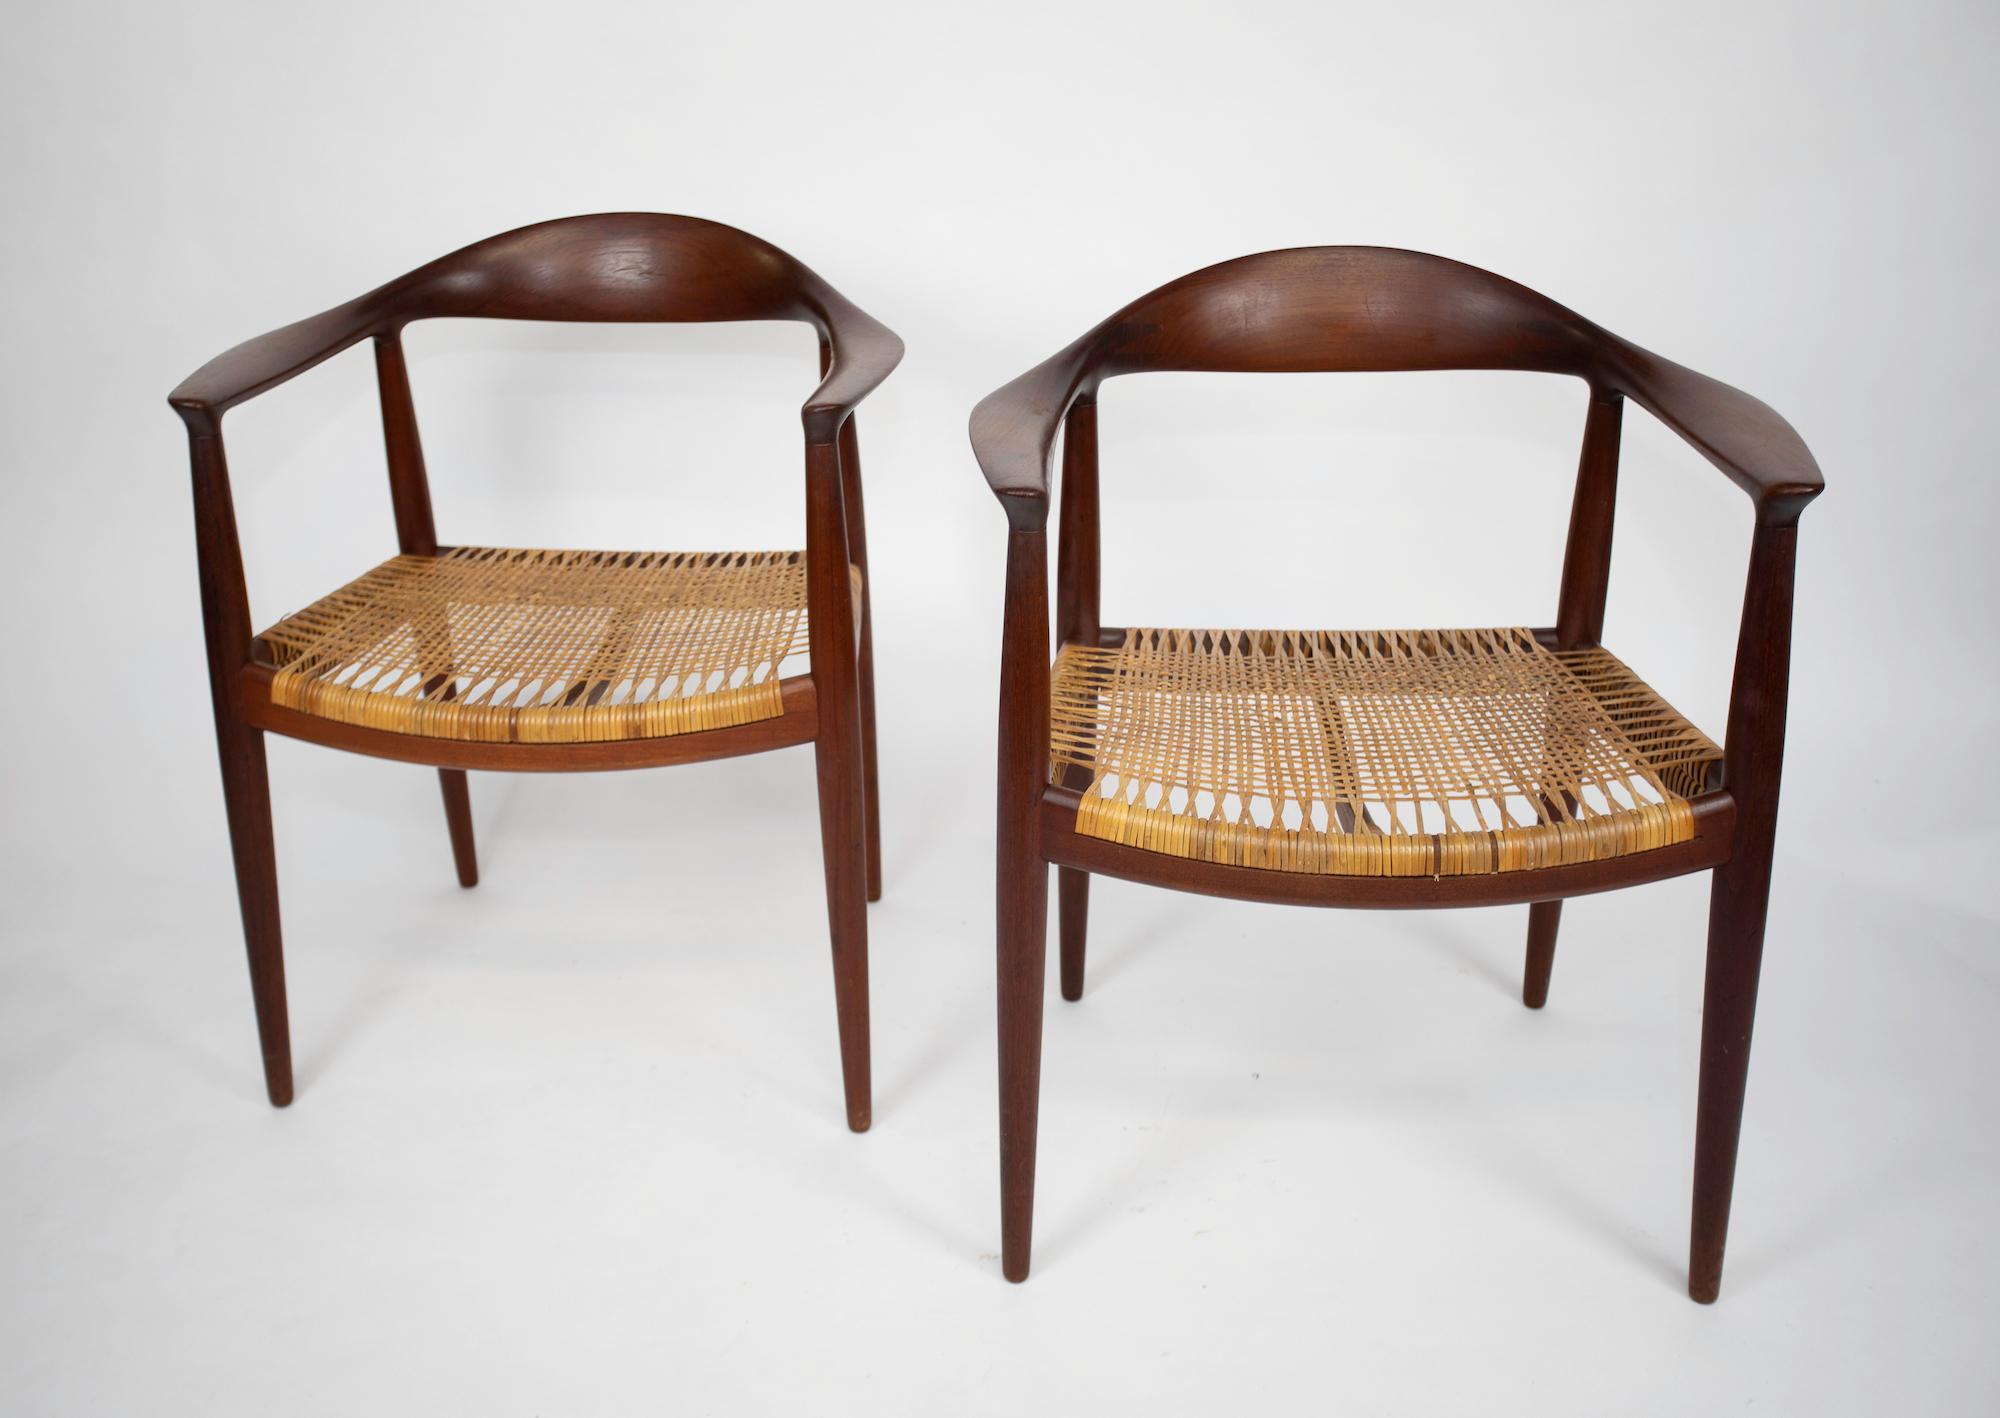 A matched pair of classic chairs.
Original Cane seats
Original surface
Branded signature.